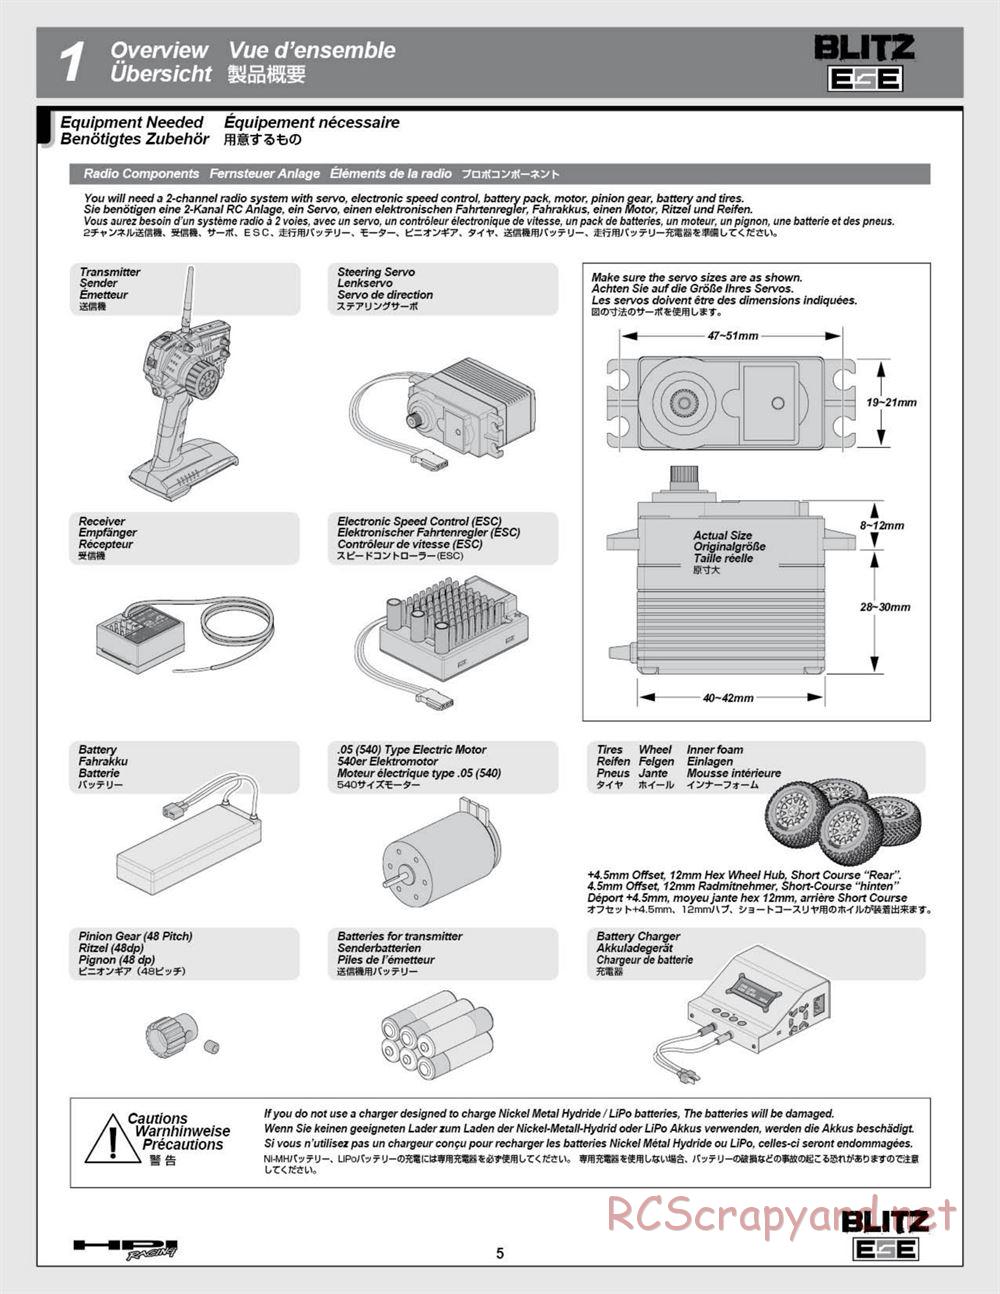 HPI - Blitz ESE - Manual - Page 5